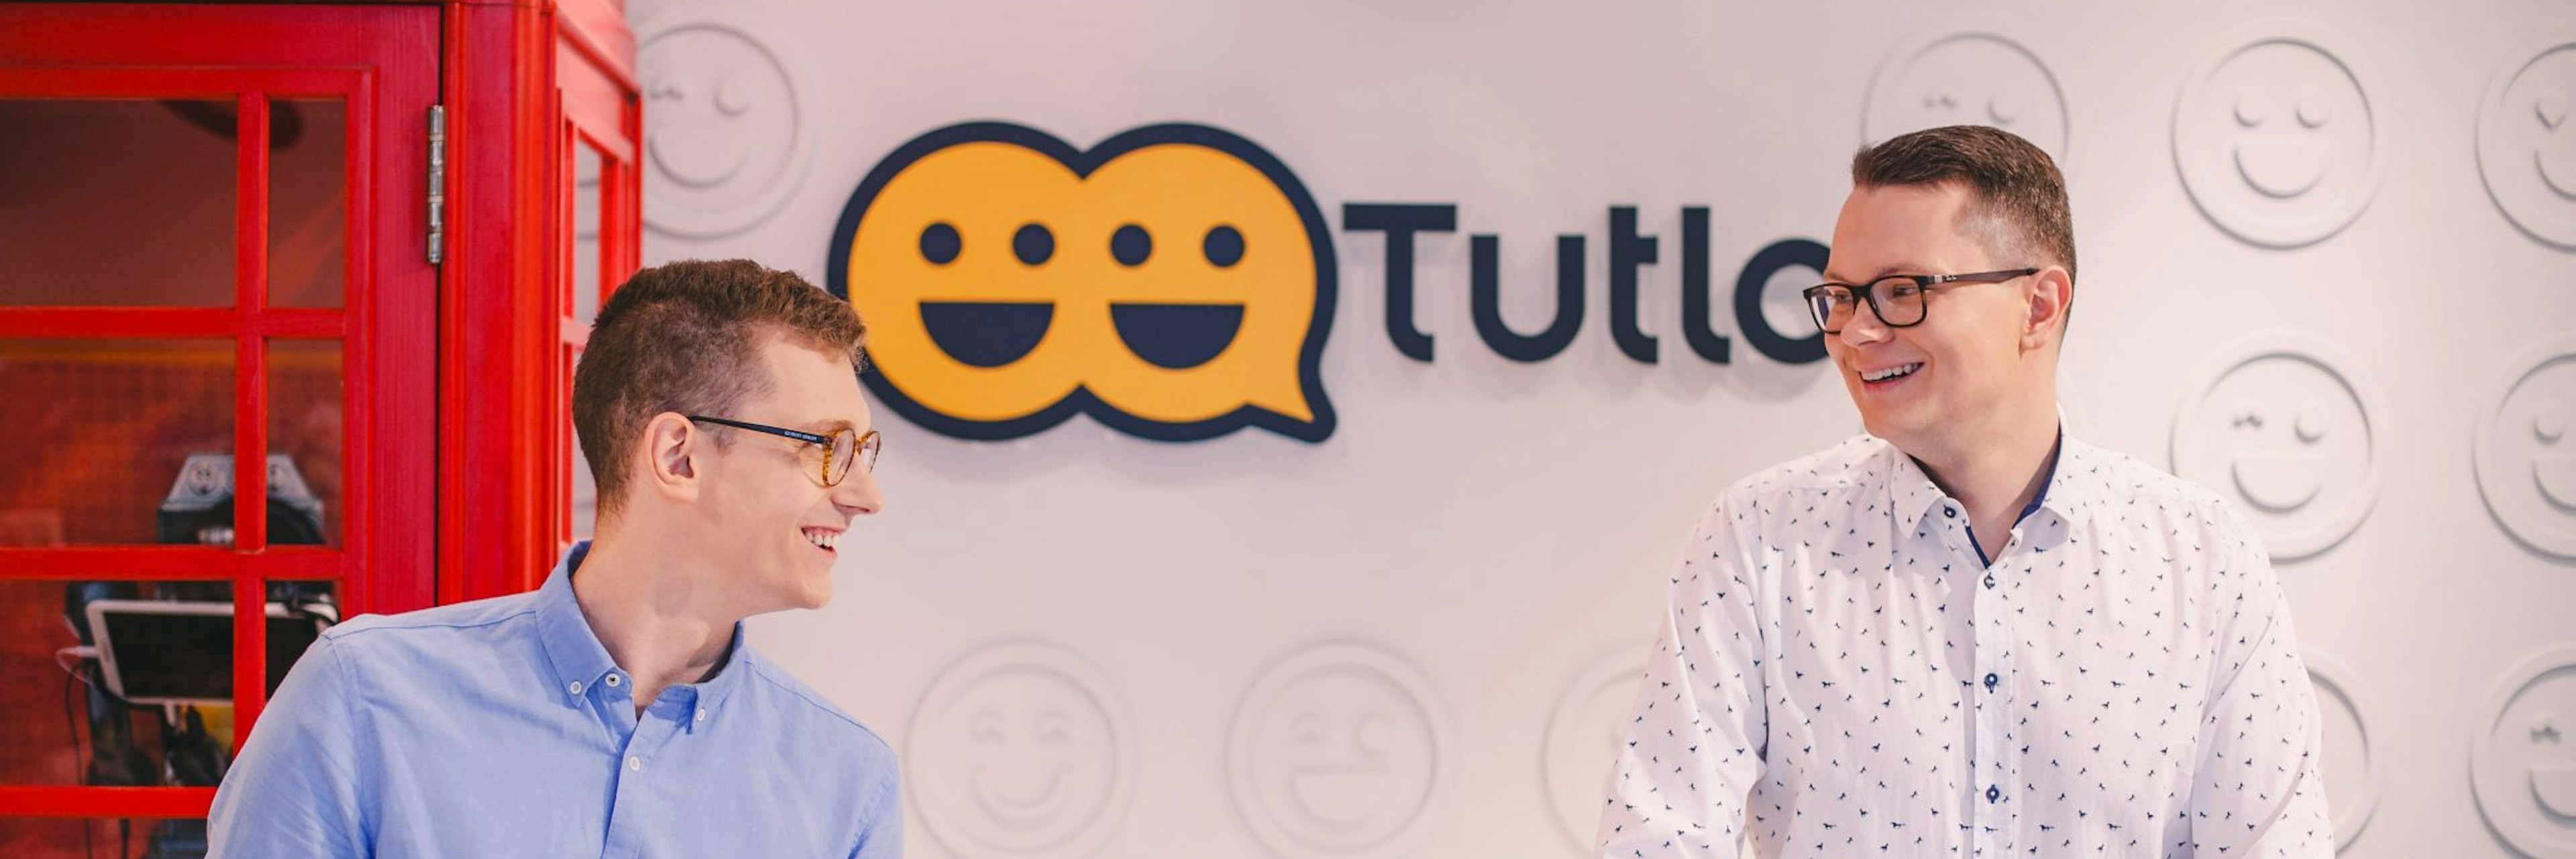 An image of the founders of Tutlo, which decided bootstrapping was the best way to grow their business